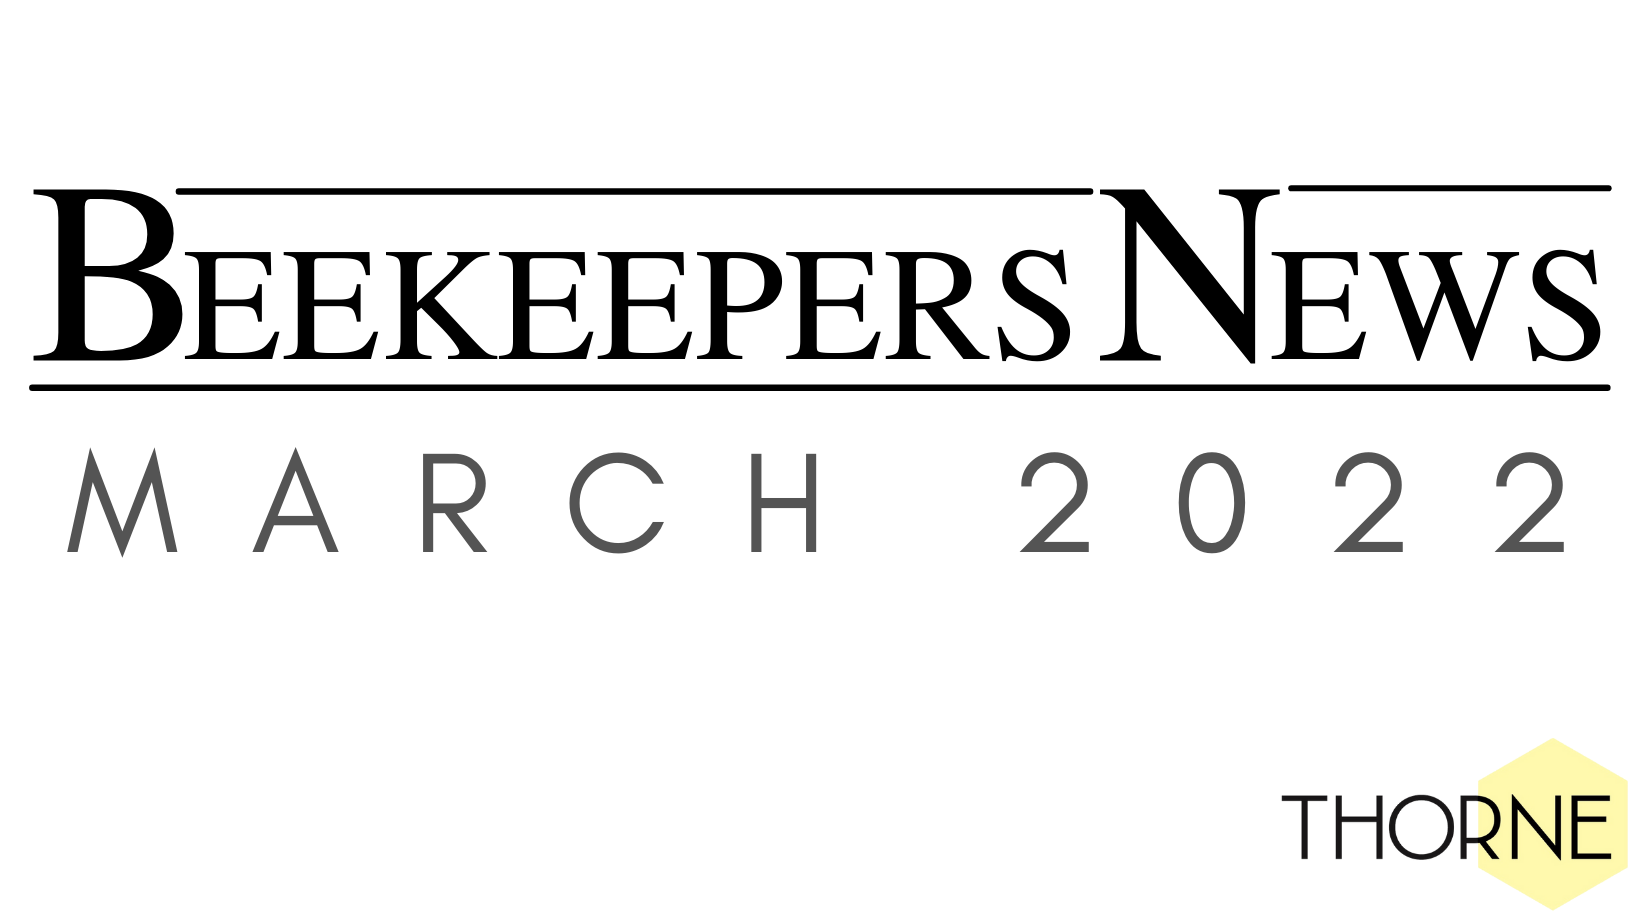 Beekeepers News - March - Issue 66